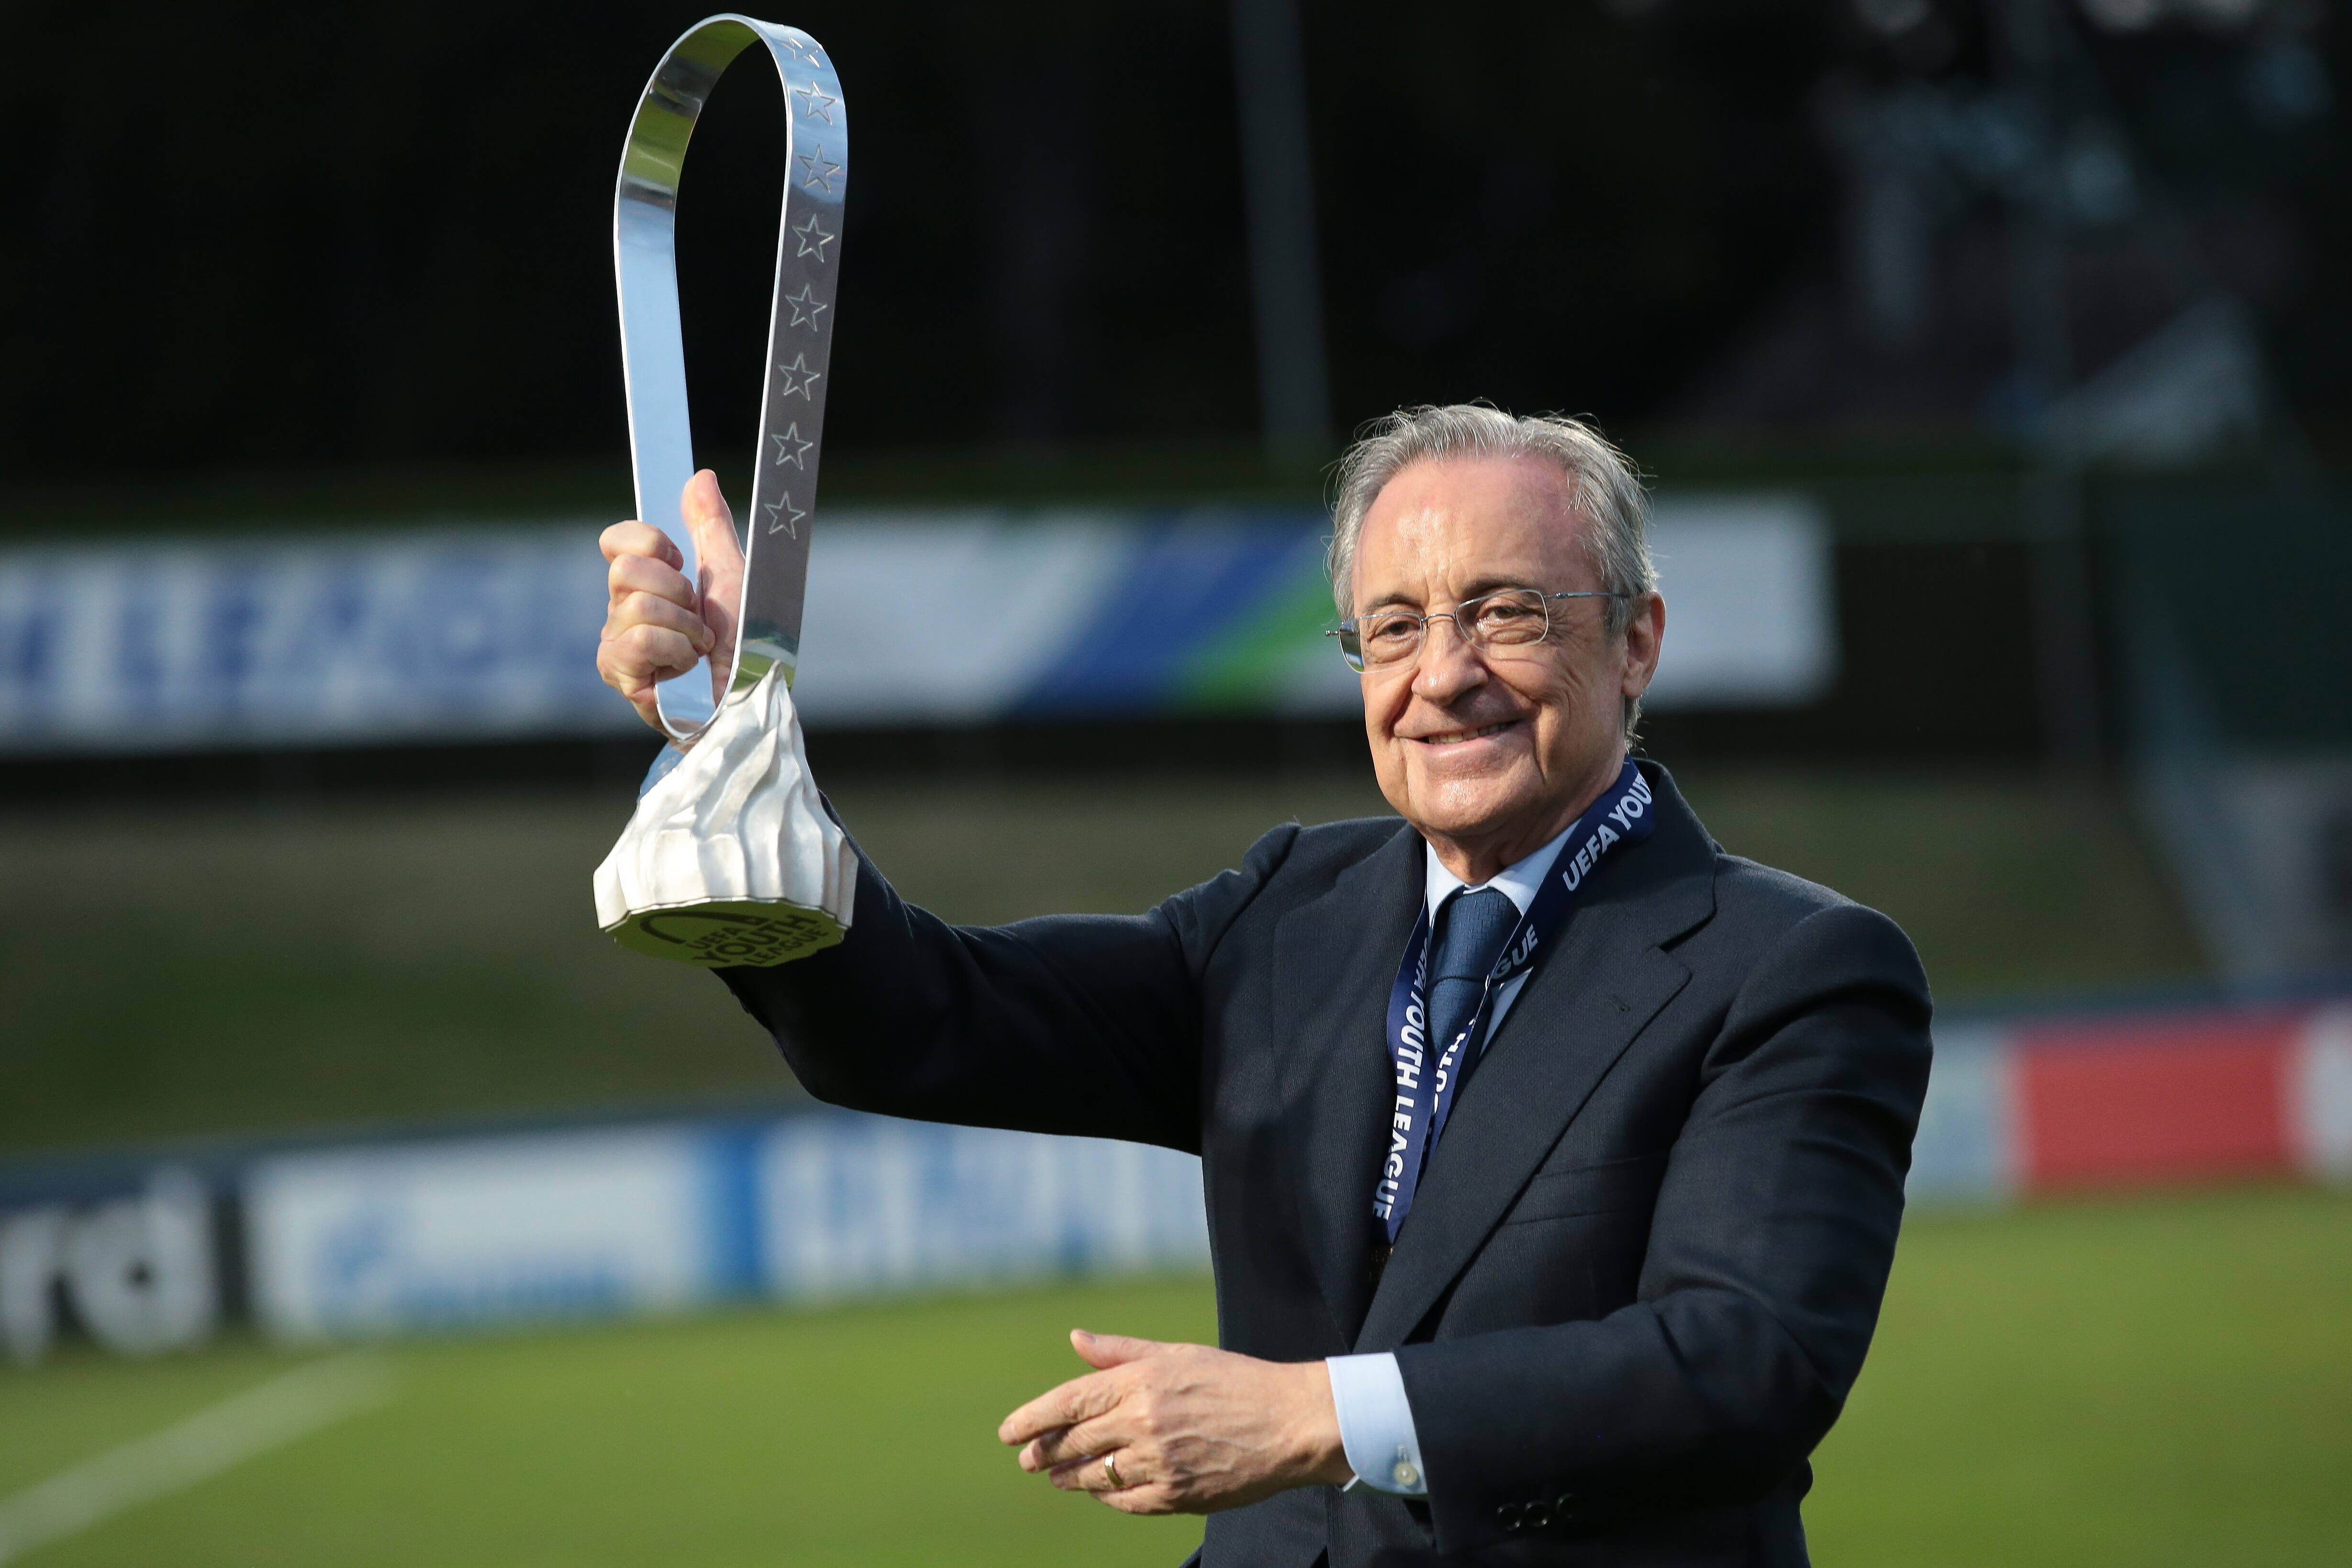 Florentino Perez Pictured With The Trophy Following The Uefa Youth League Match At Colovray Sports Centre, Nyon. Picture